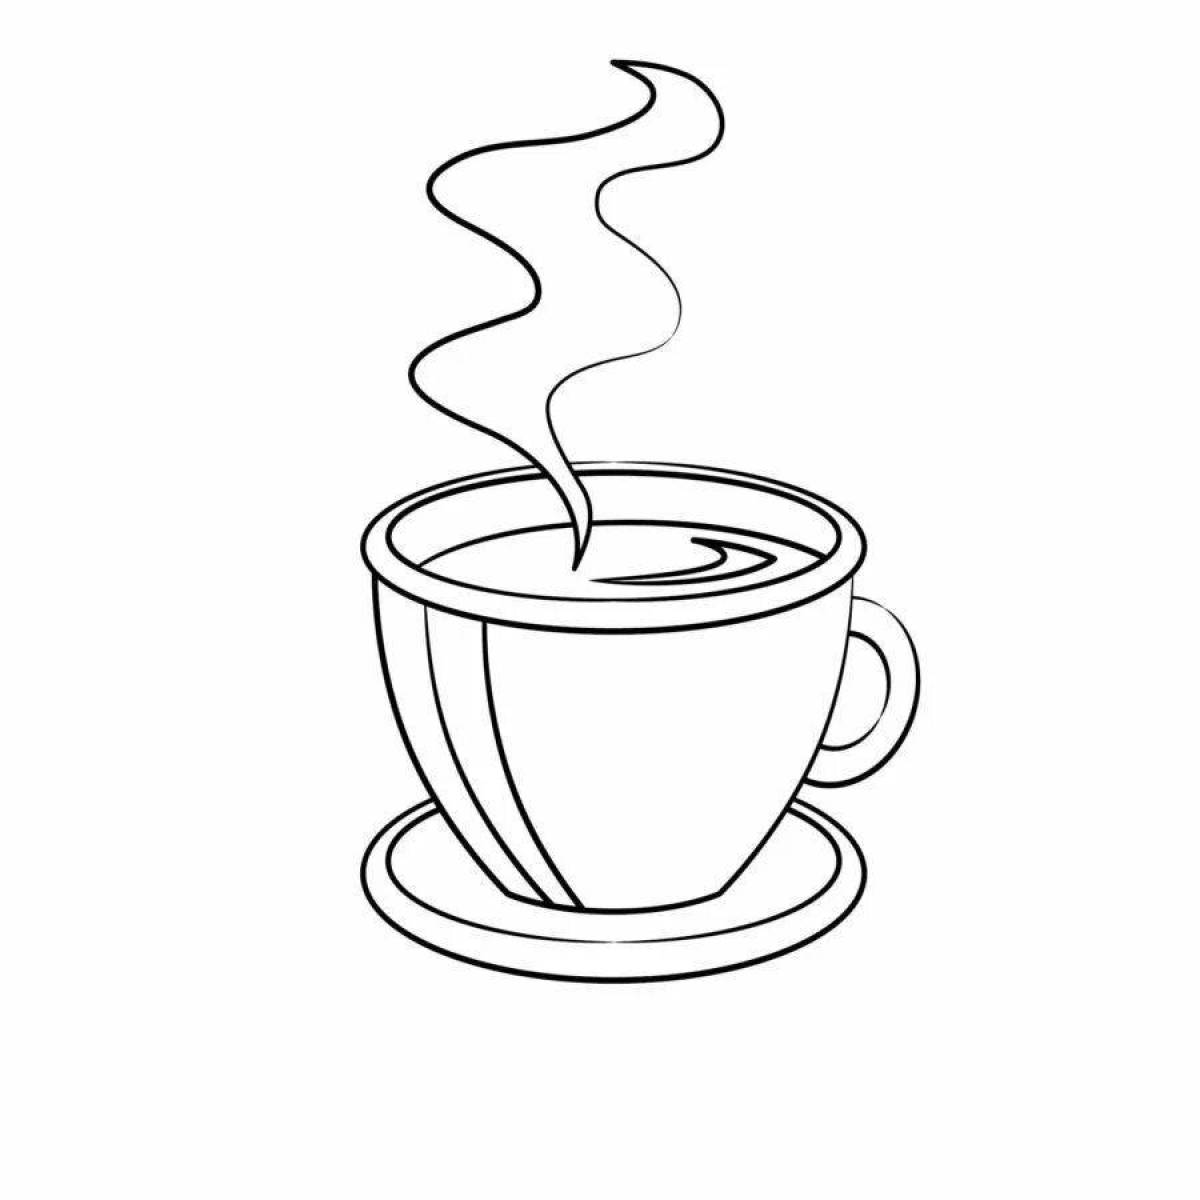 Gorgeous cup of tea coloring page